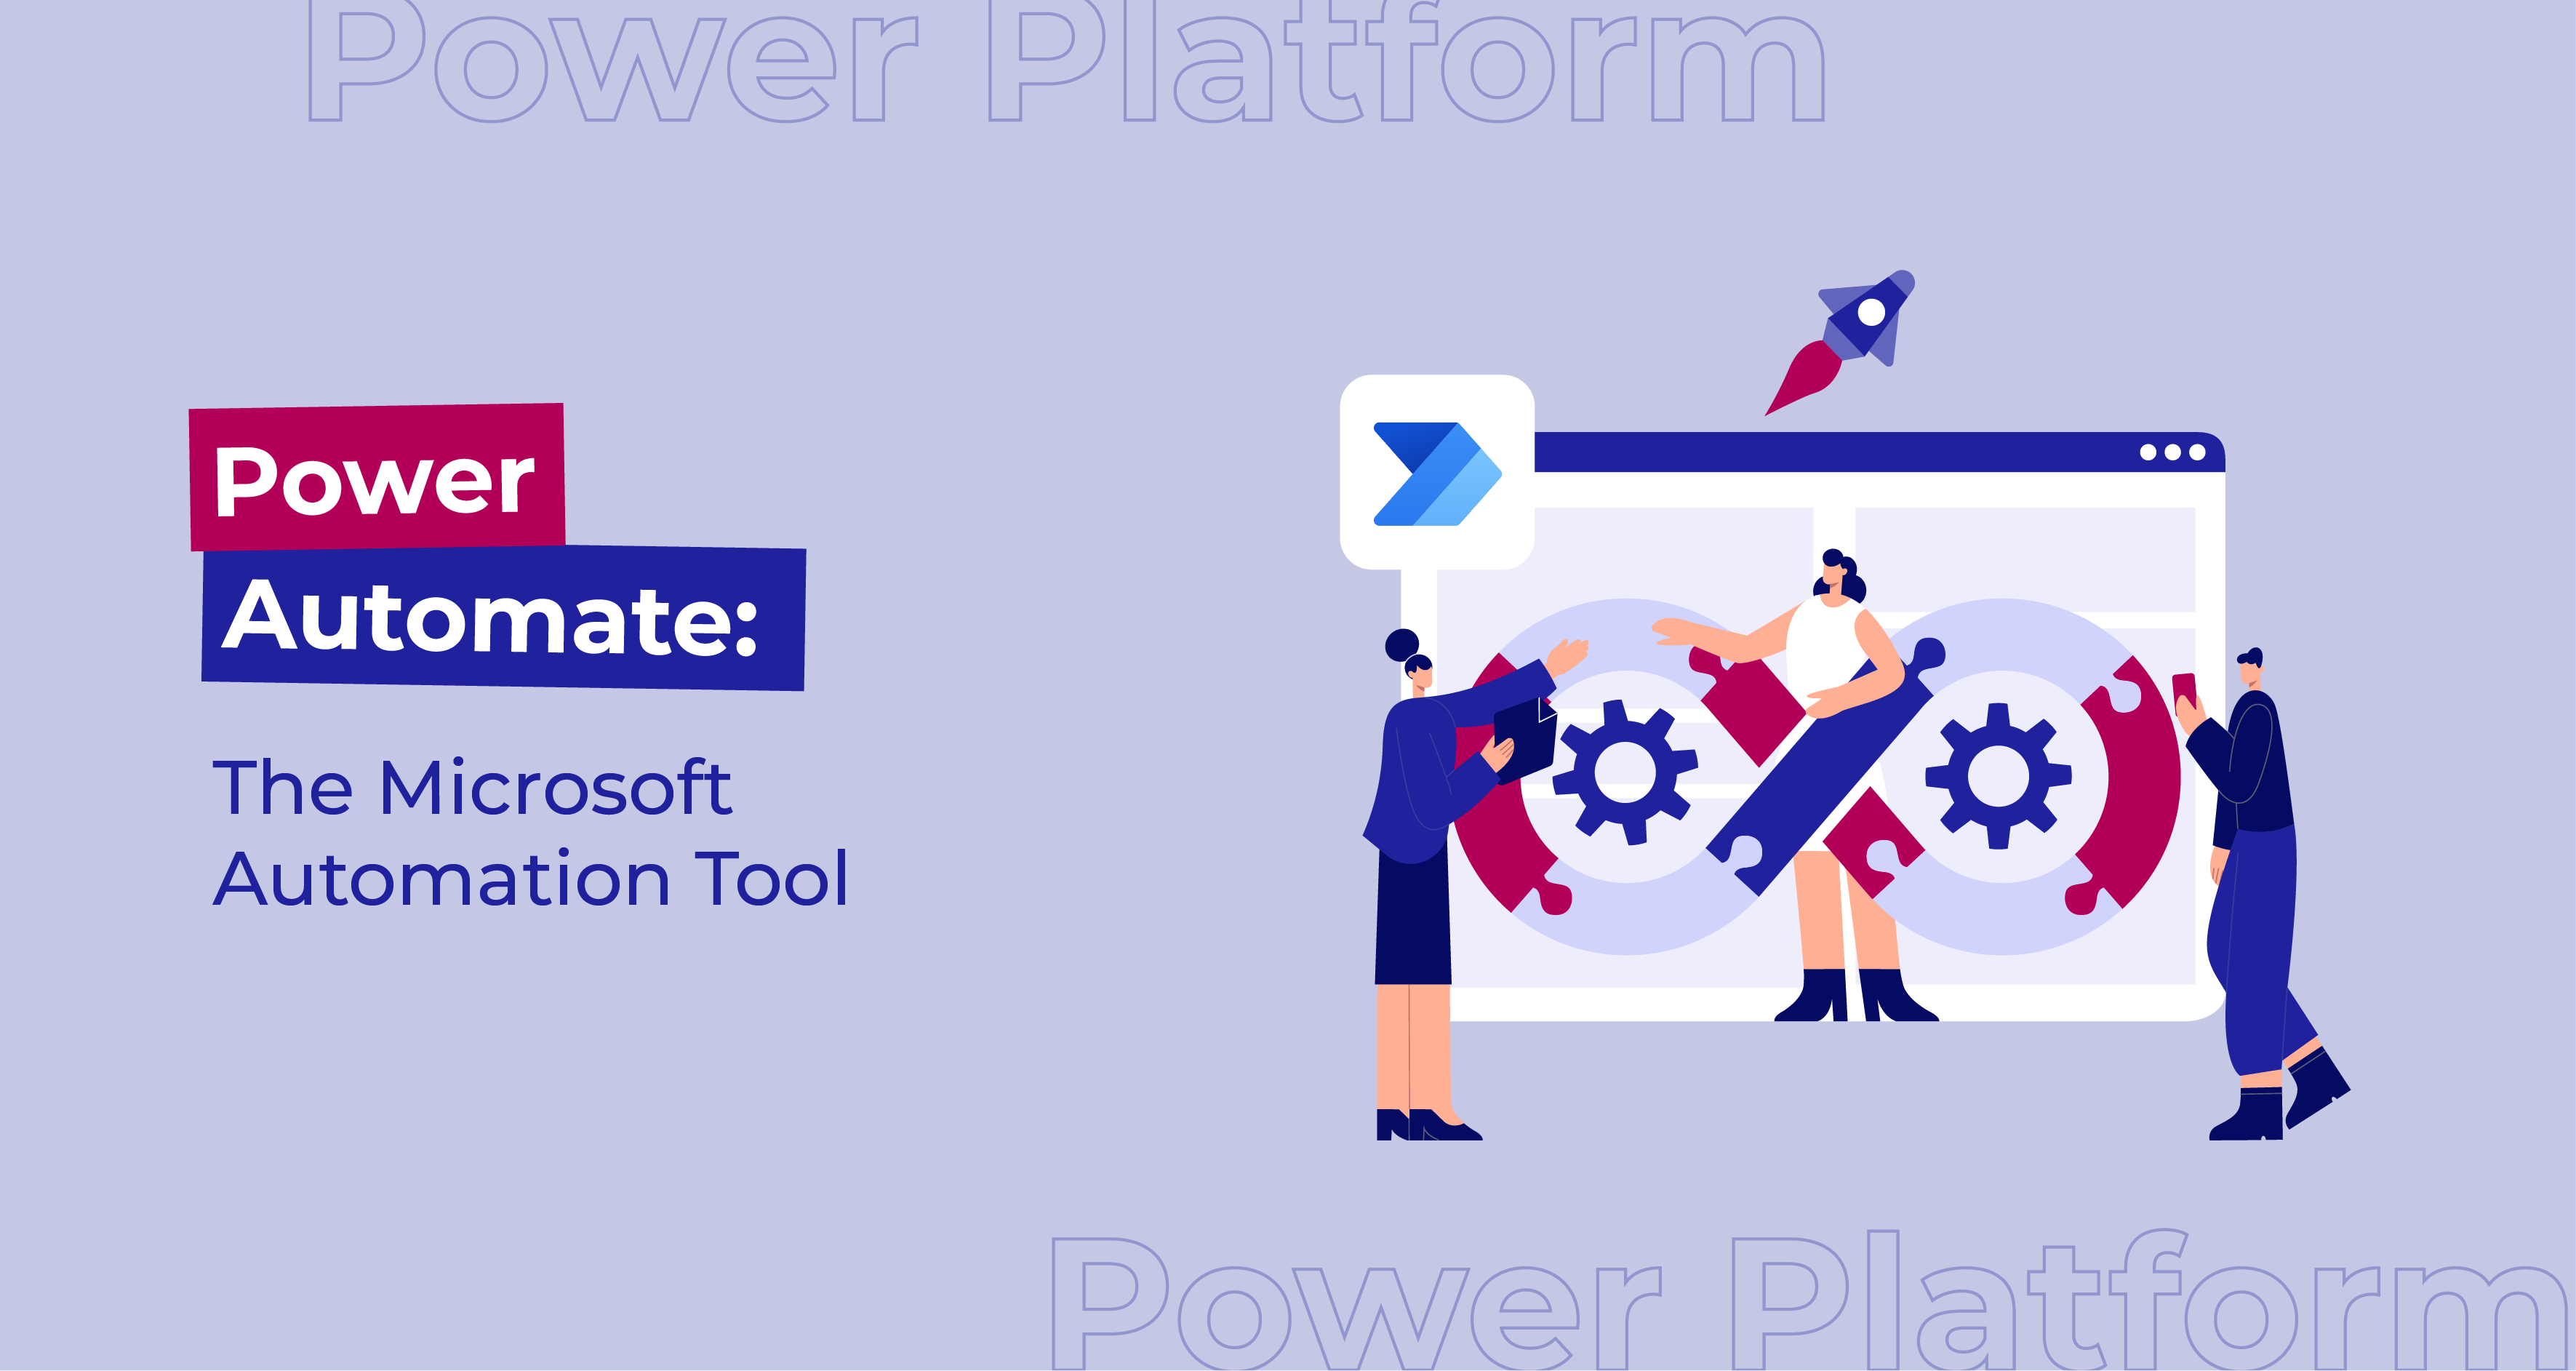 Power Automate: The Microsoft Automation Tool